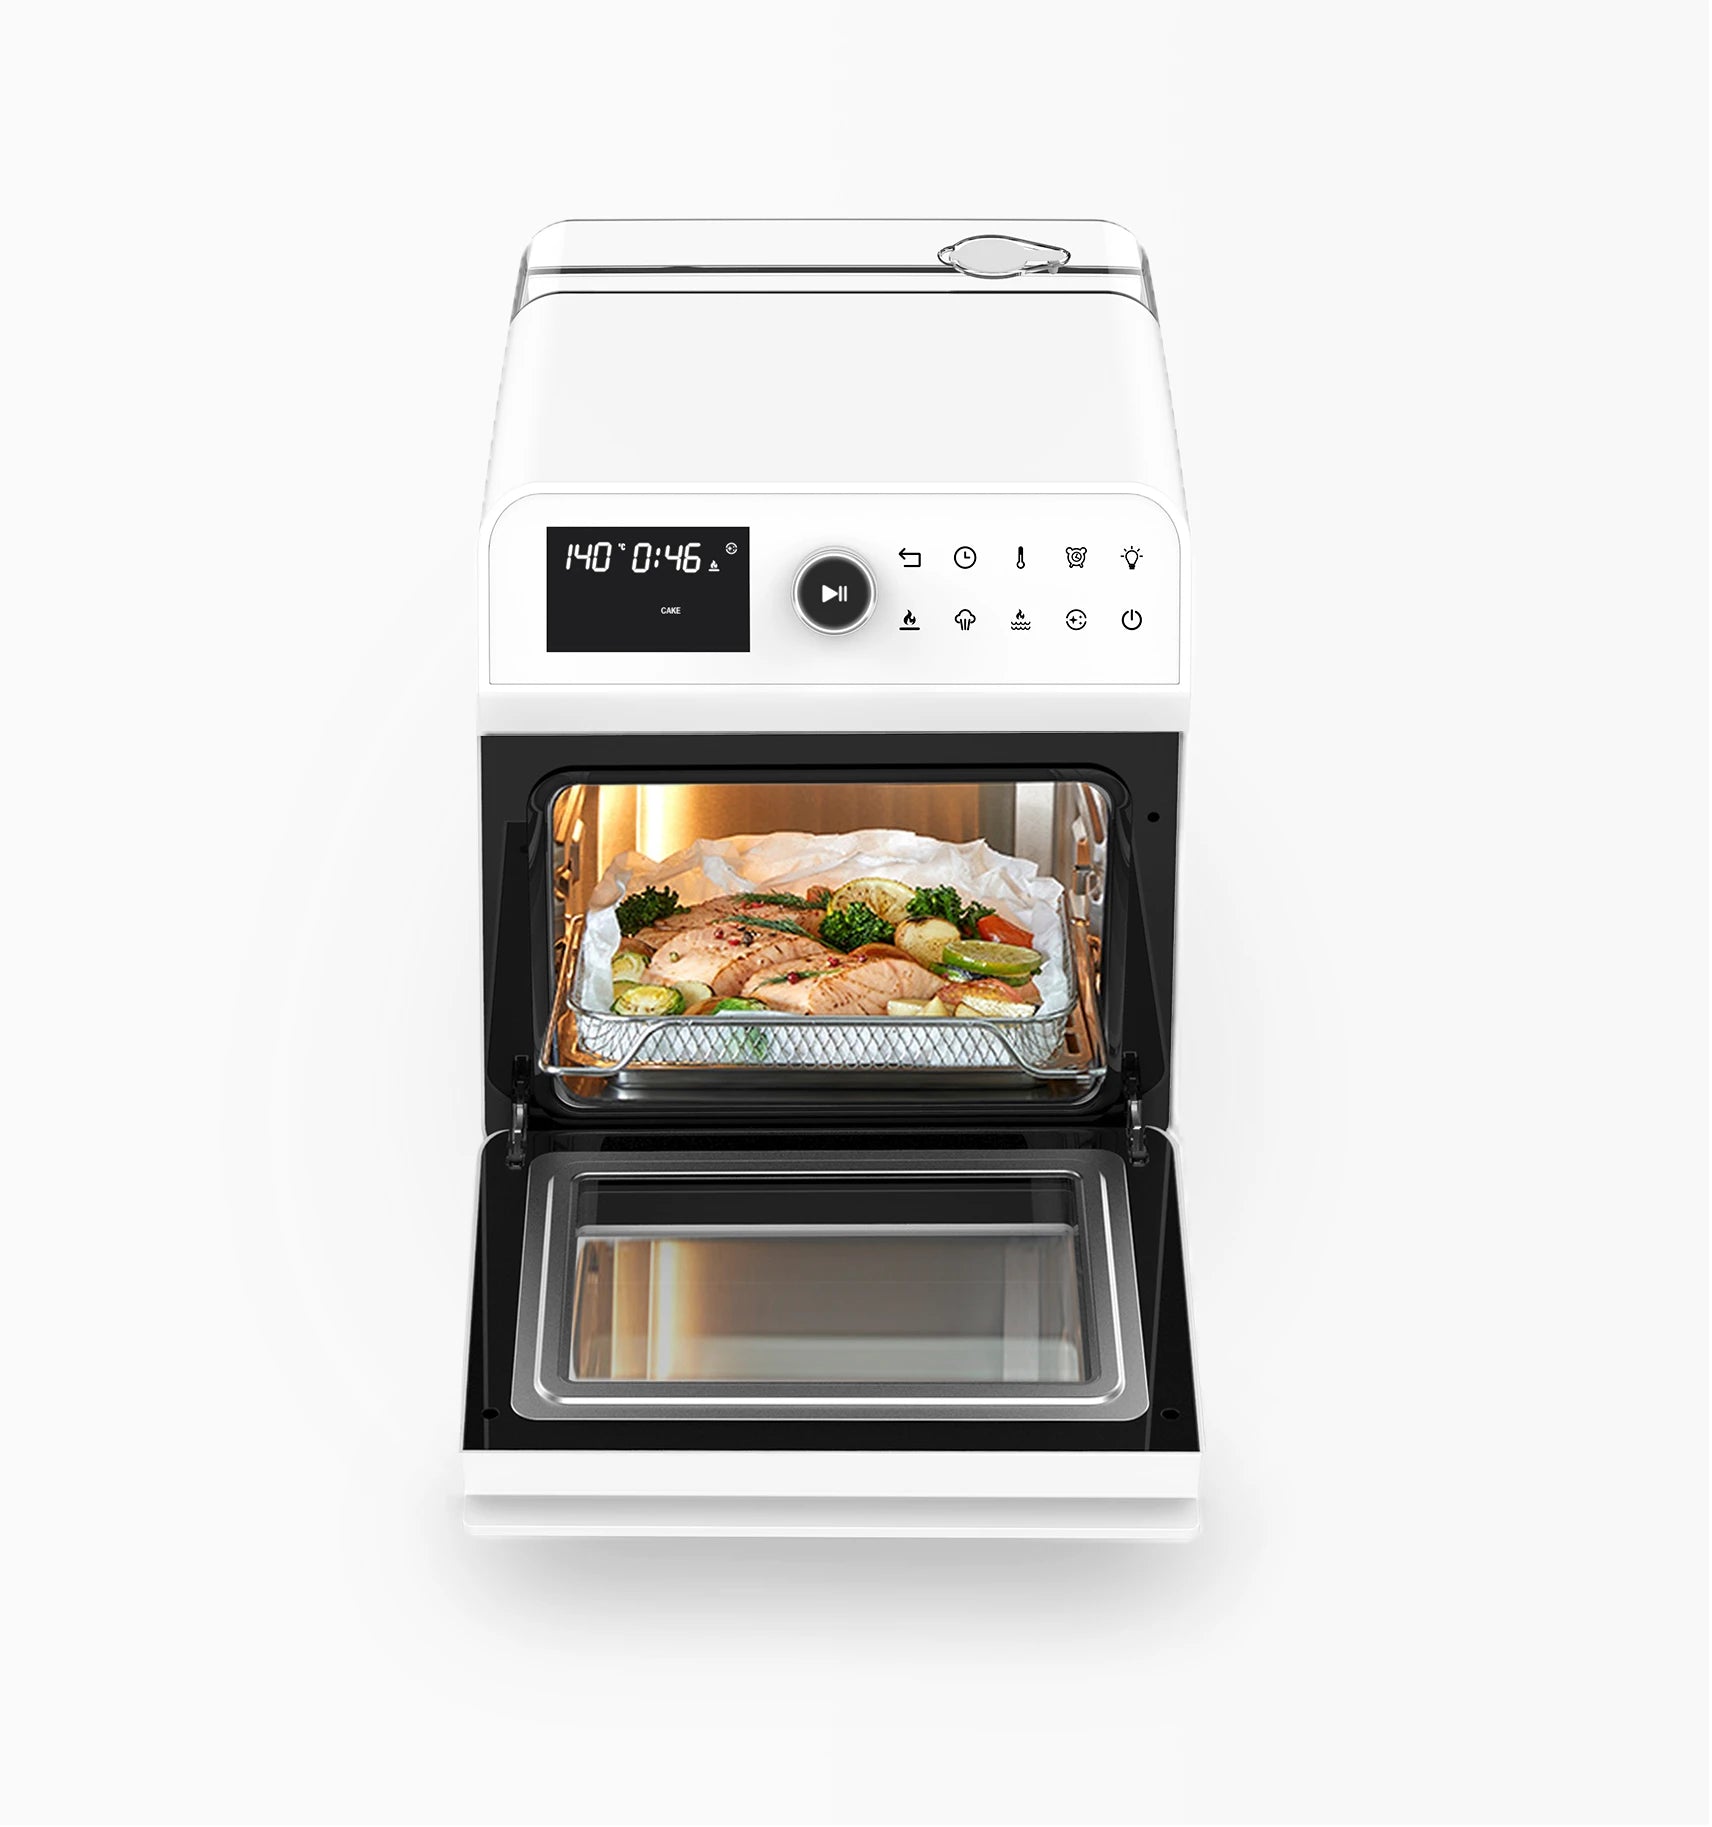 Ruokala air fryer cooking a nutritious meal of fish and vegetables, showcasing the ease of preparing healthy dishes.